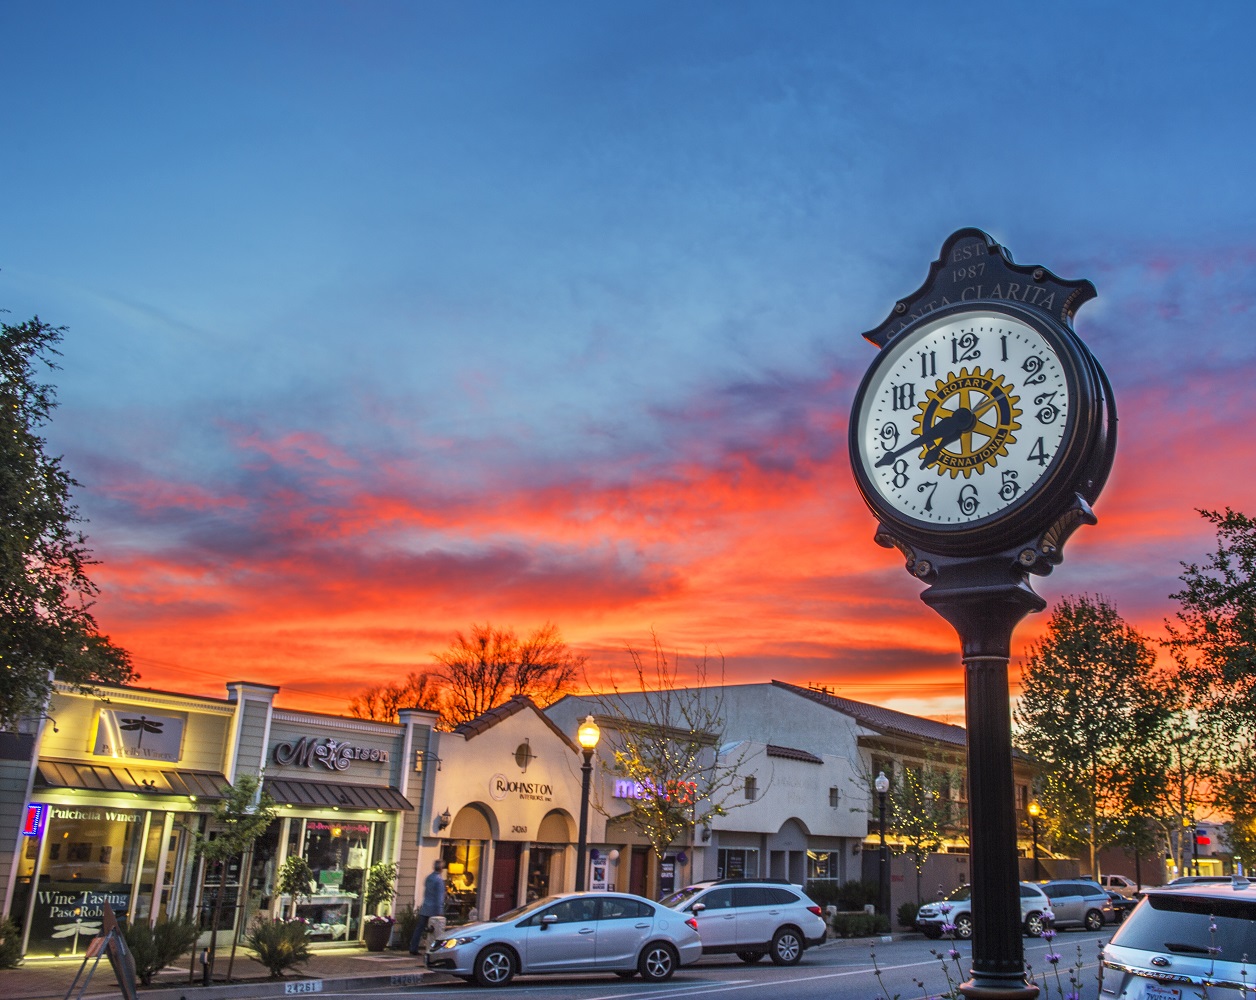 Clock and storefronts in Old Town Newhall